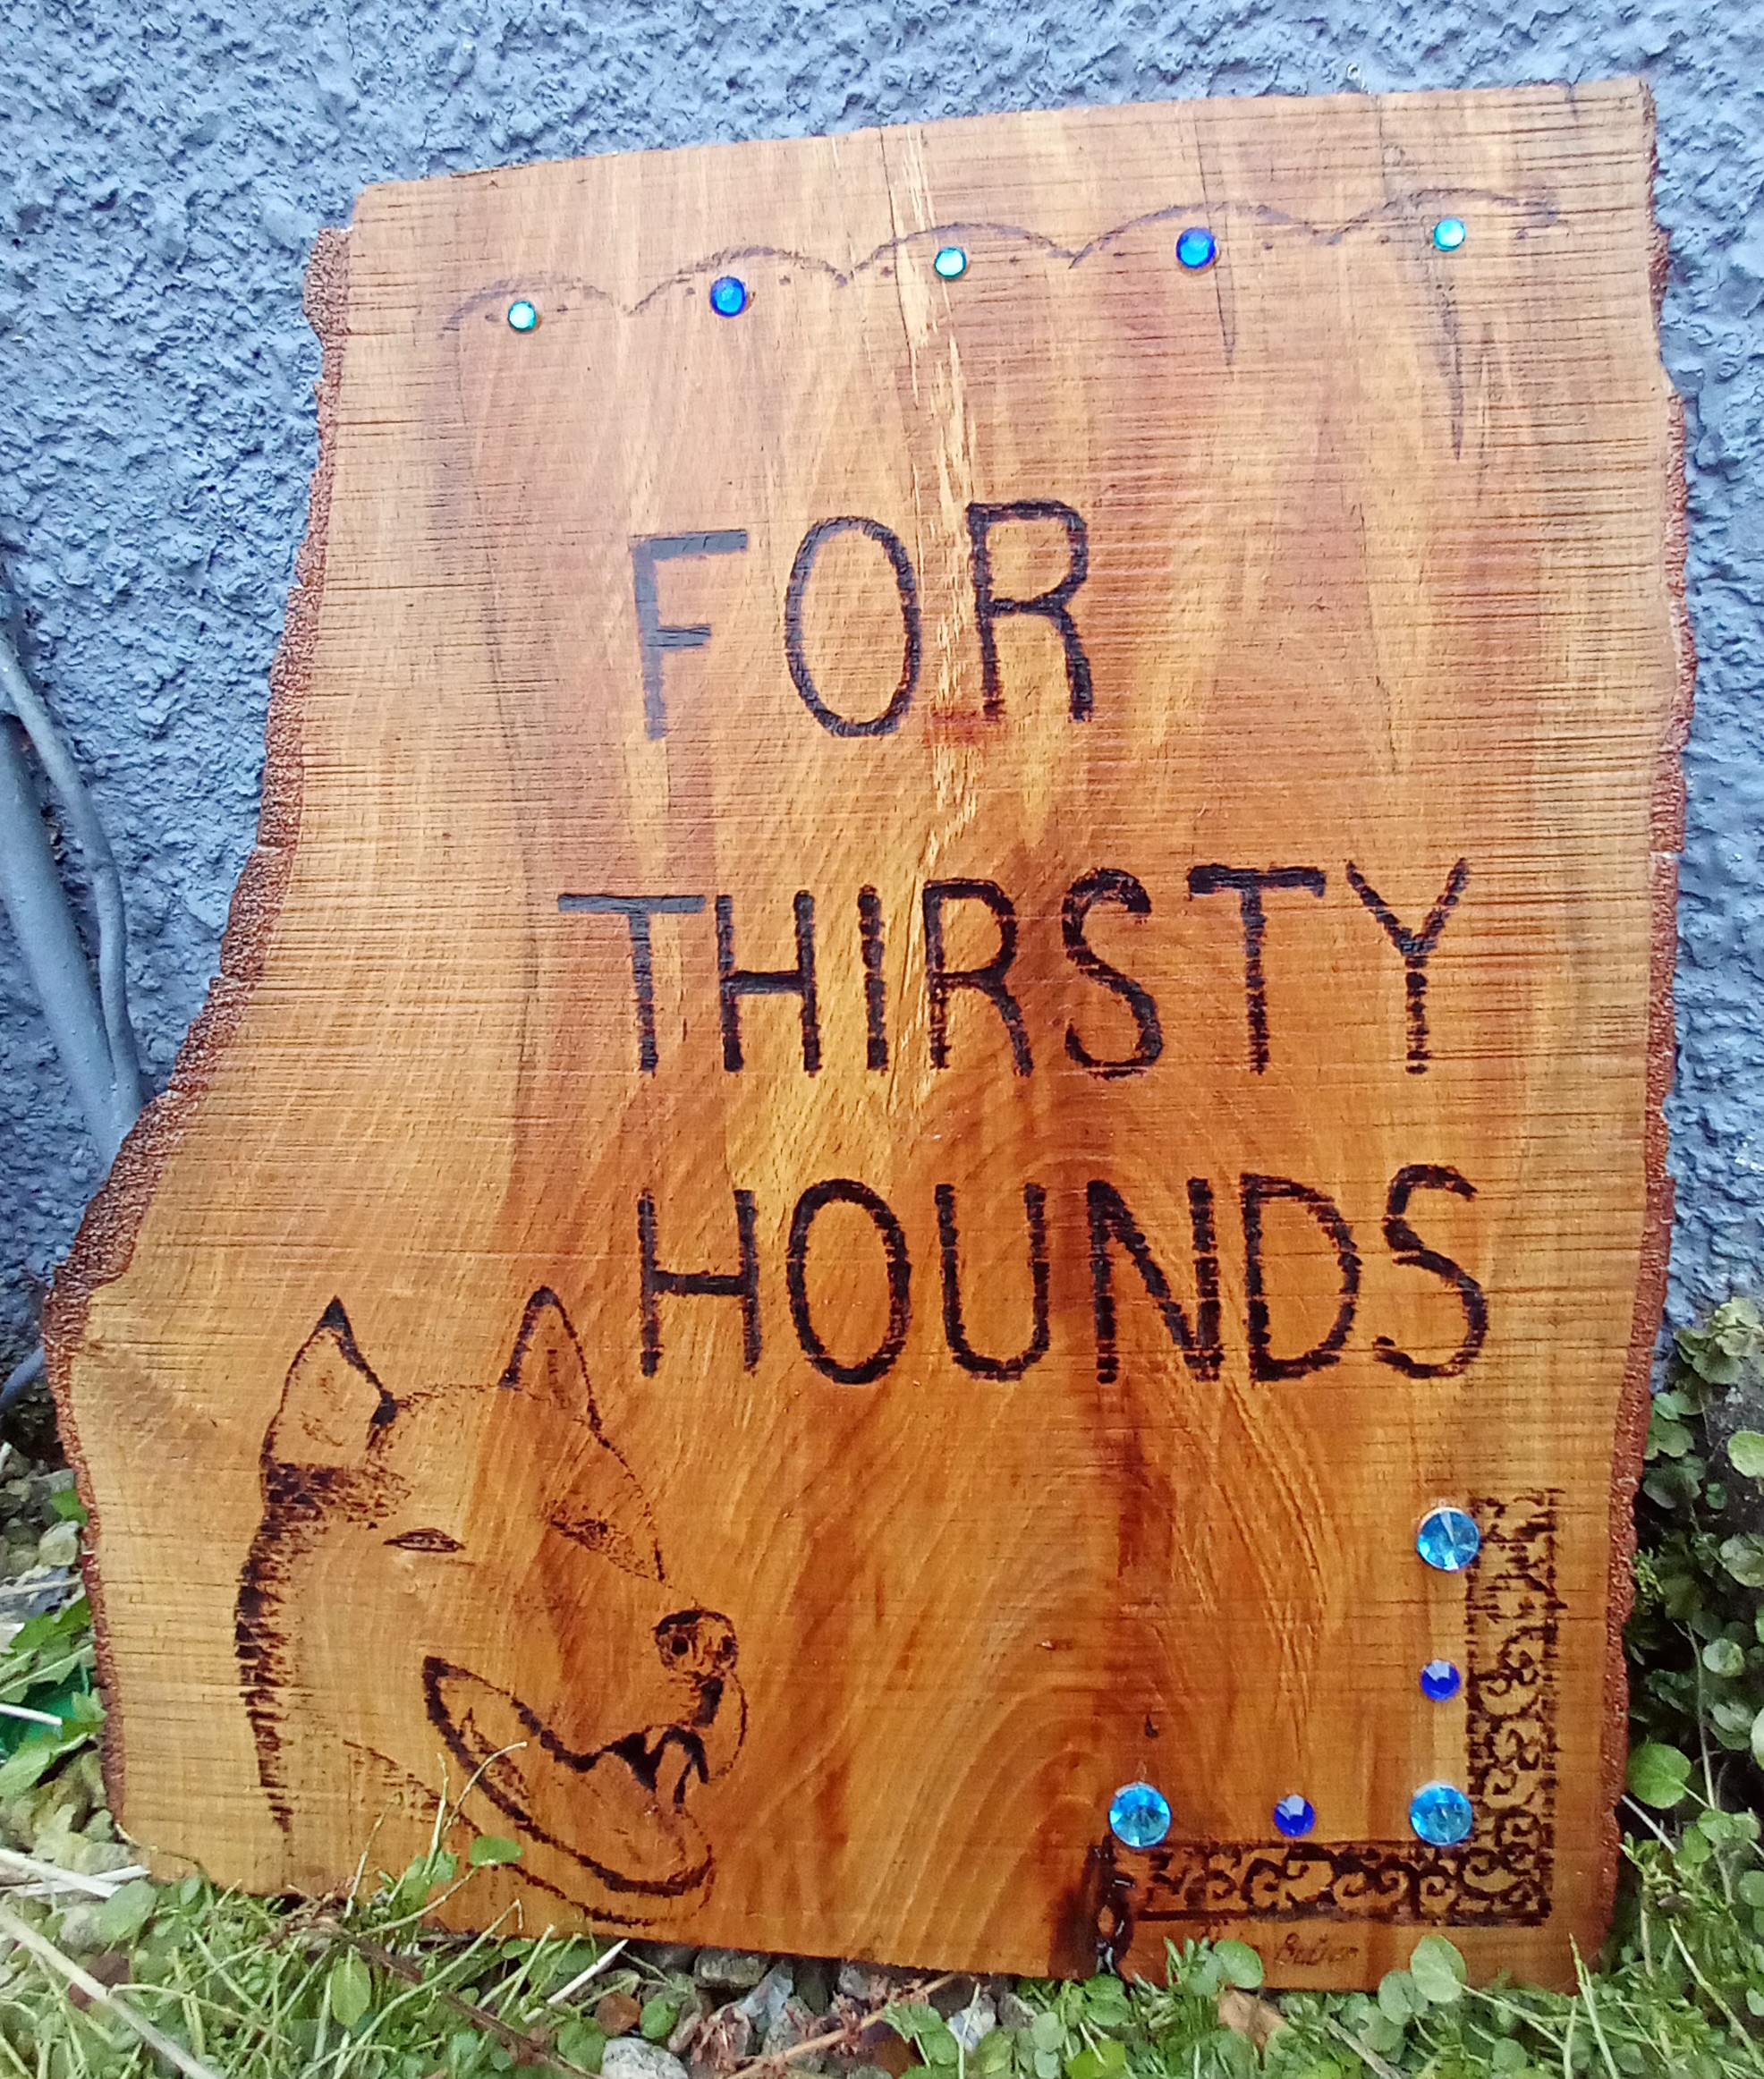 Dog watering sign made for The Crinan Canal